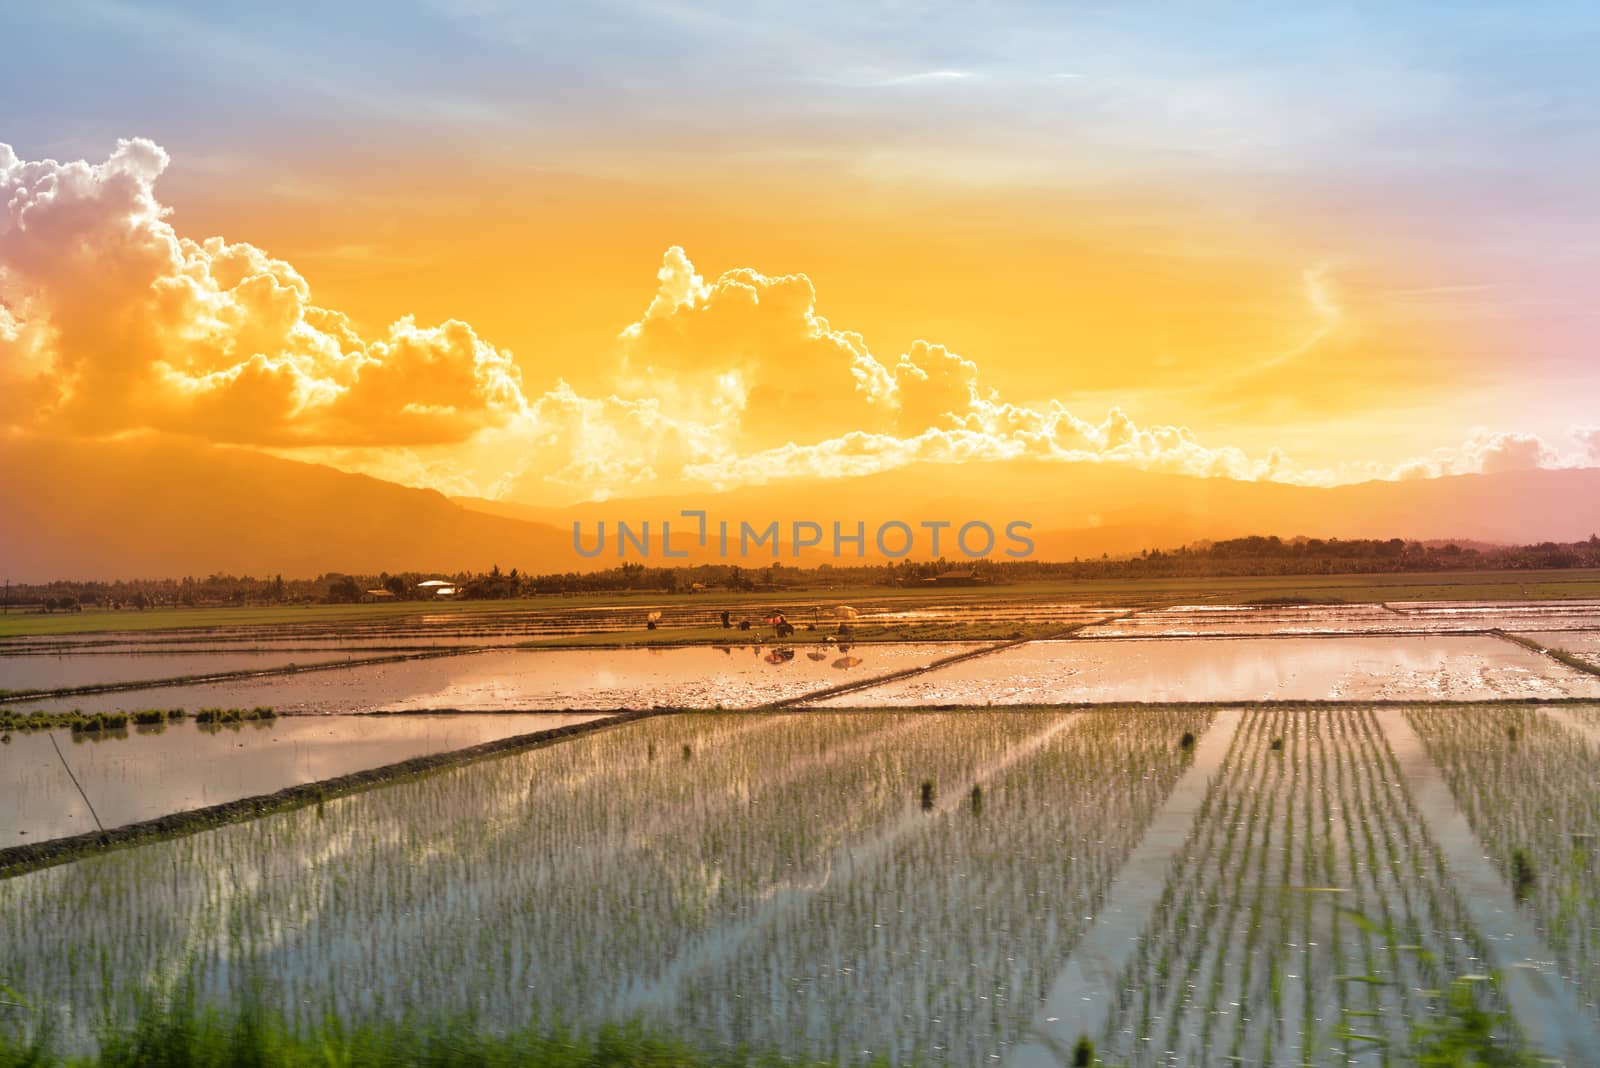 workers in a paddy field on the Philippine island of mondoro